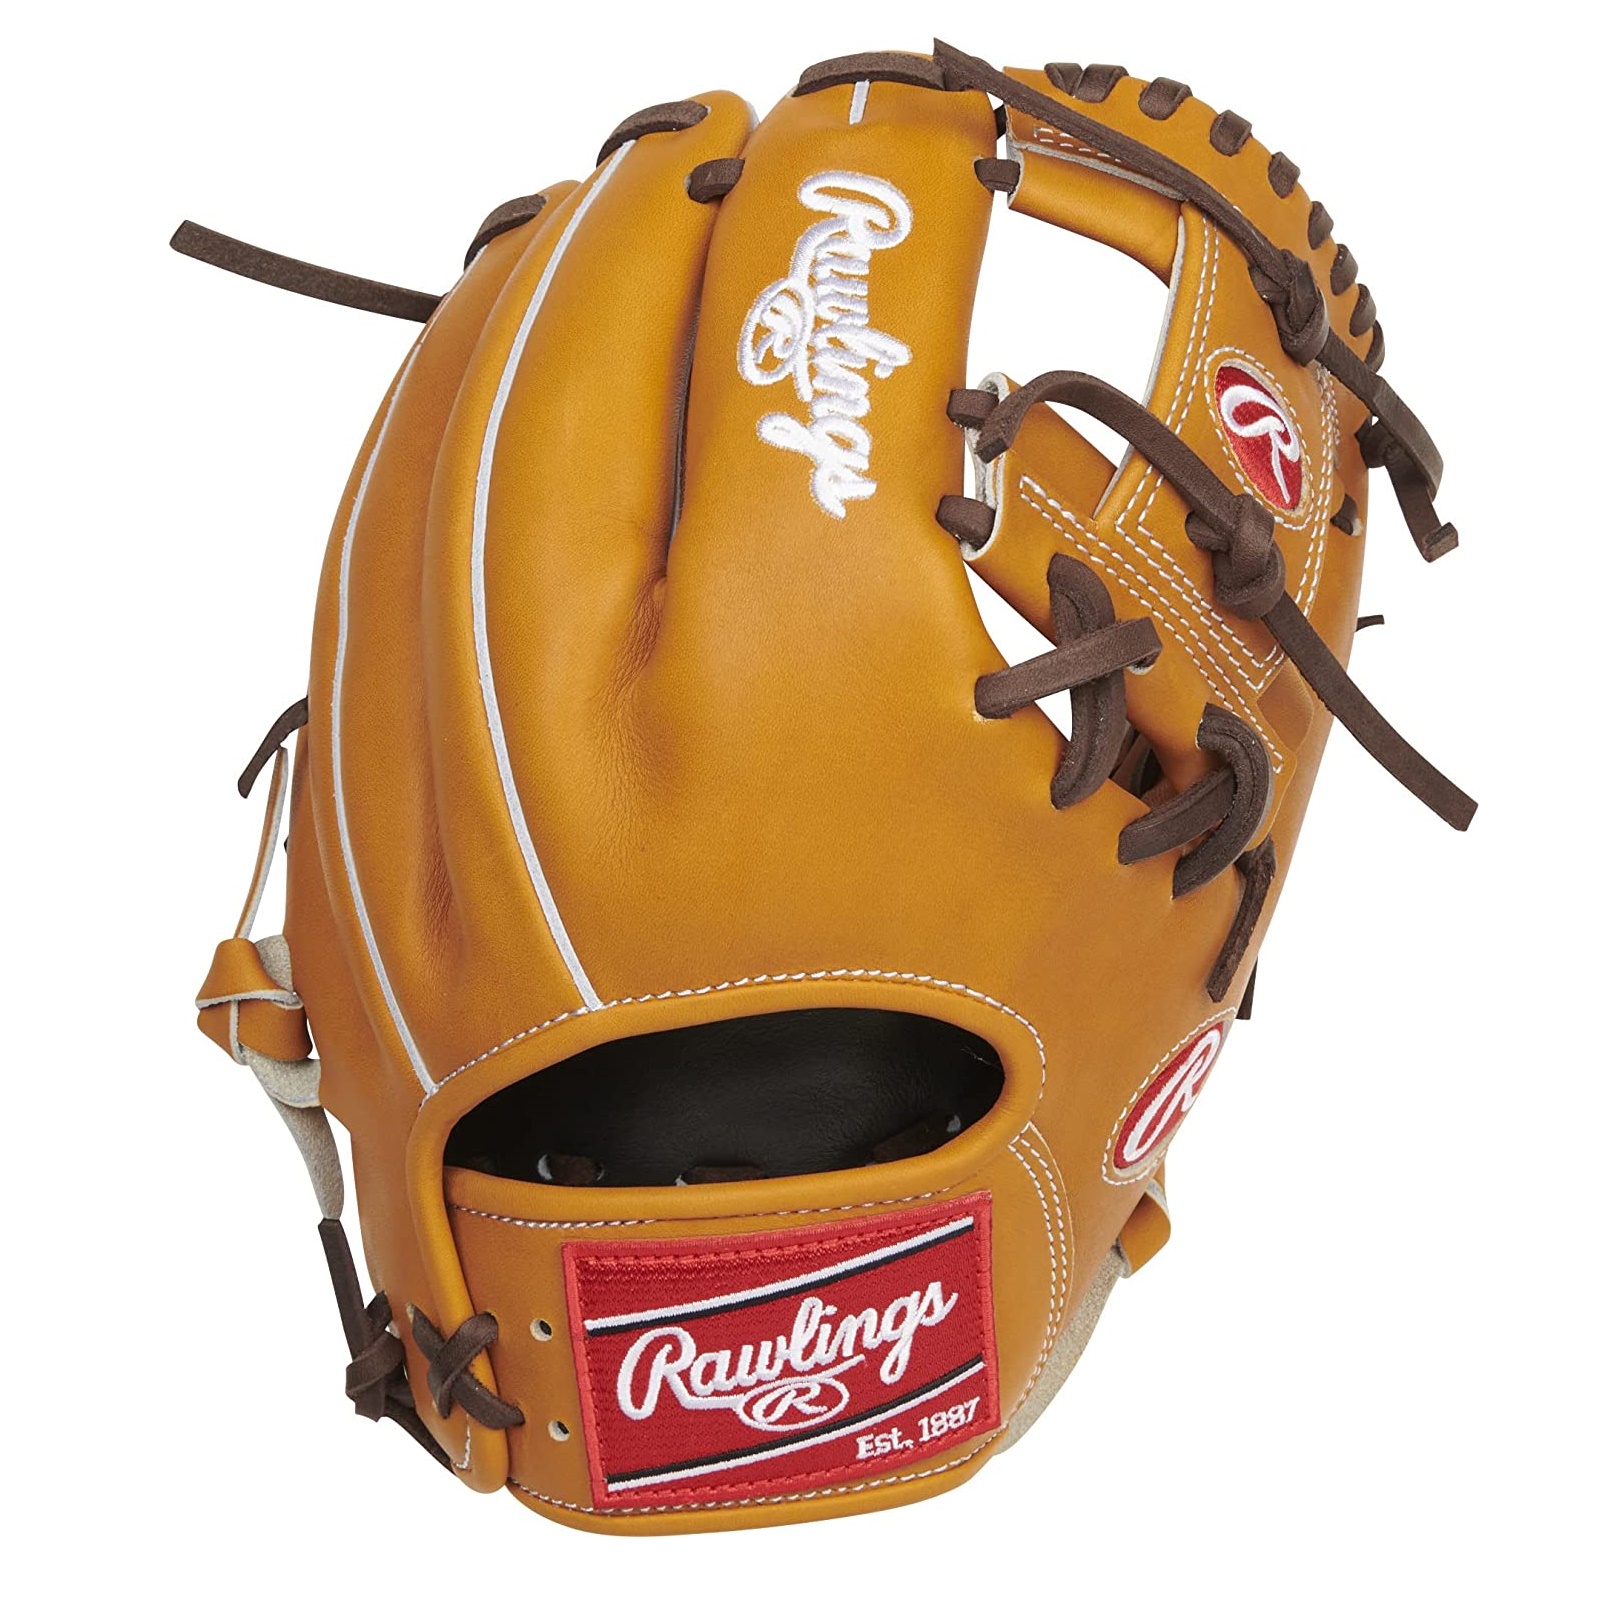 rawlings-heart-of-the-hide-11-5-inch-baseball-glove-pro-i-web-right-hand-throw PRO204-2T-RightHandThrow Rawlings  The Heart of the Hide steer leather used in these gloves